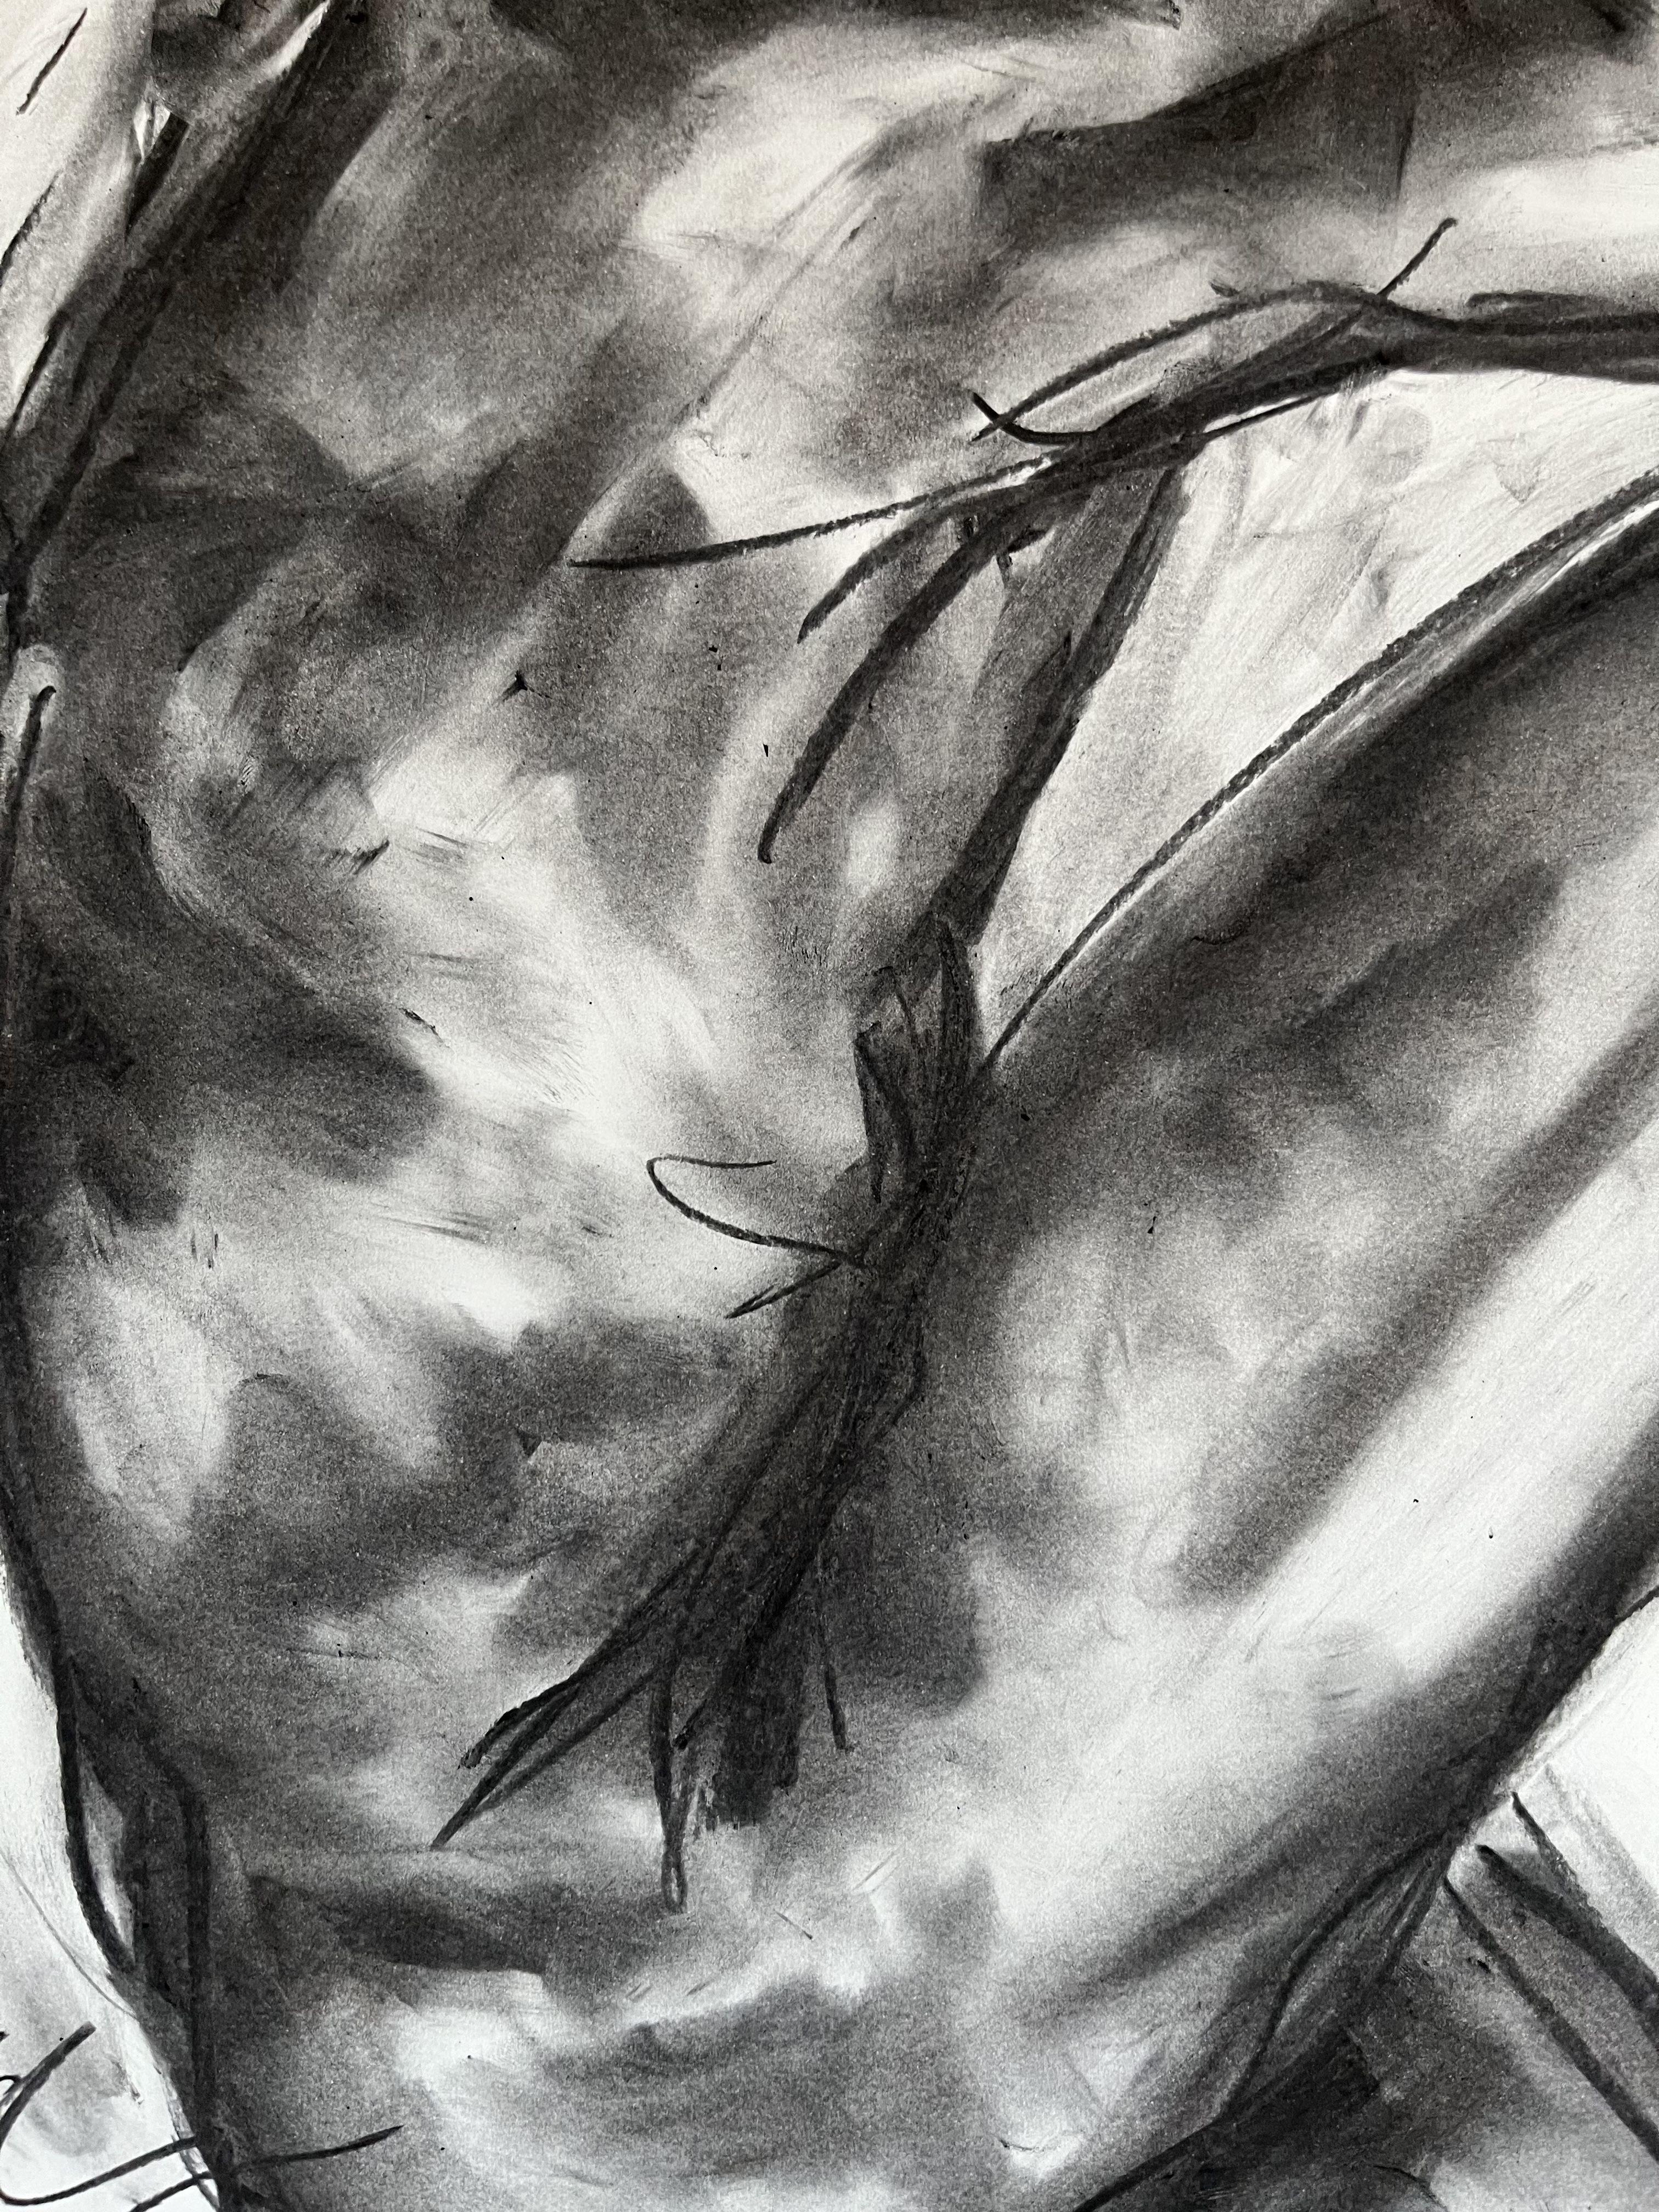 Our Best, Drawing, Charcoal on Paper - Impressionist Art by James Shipton